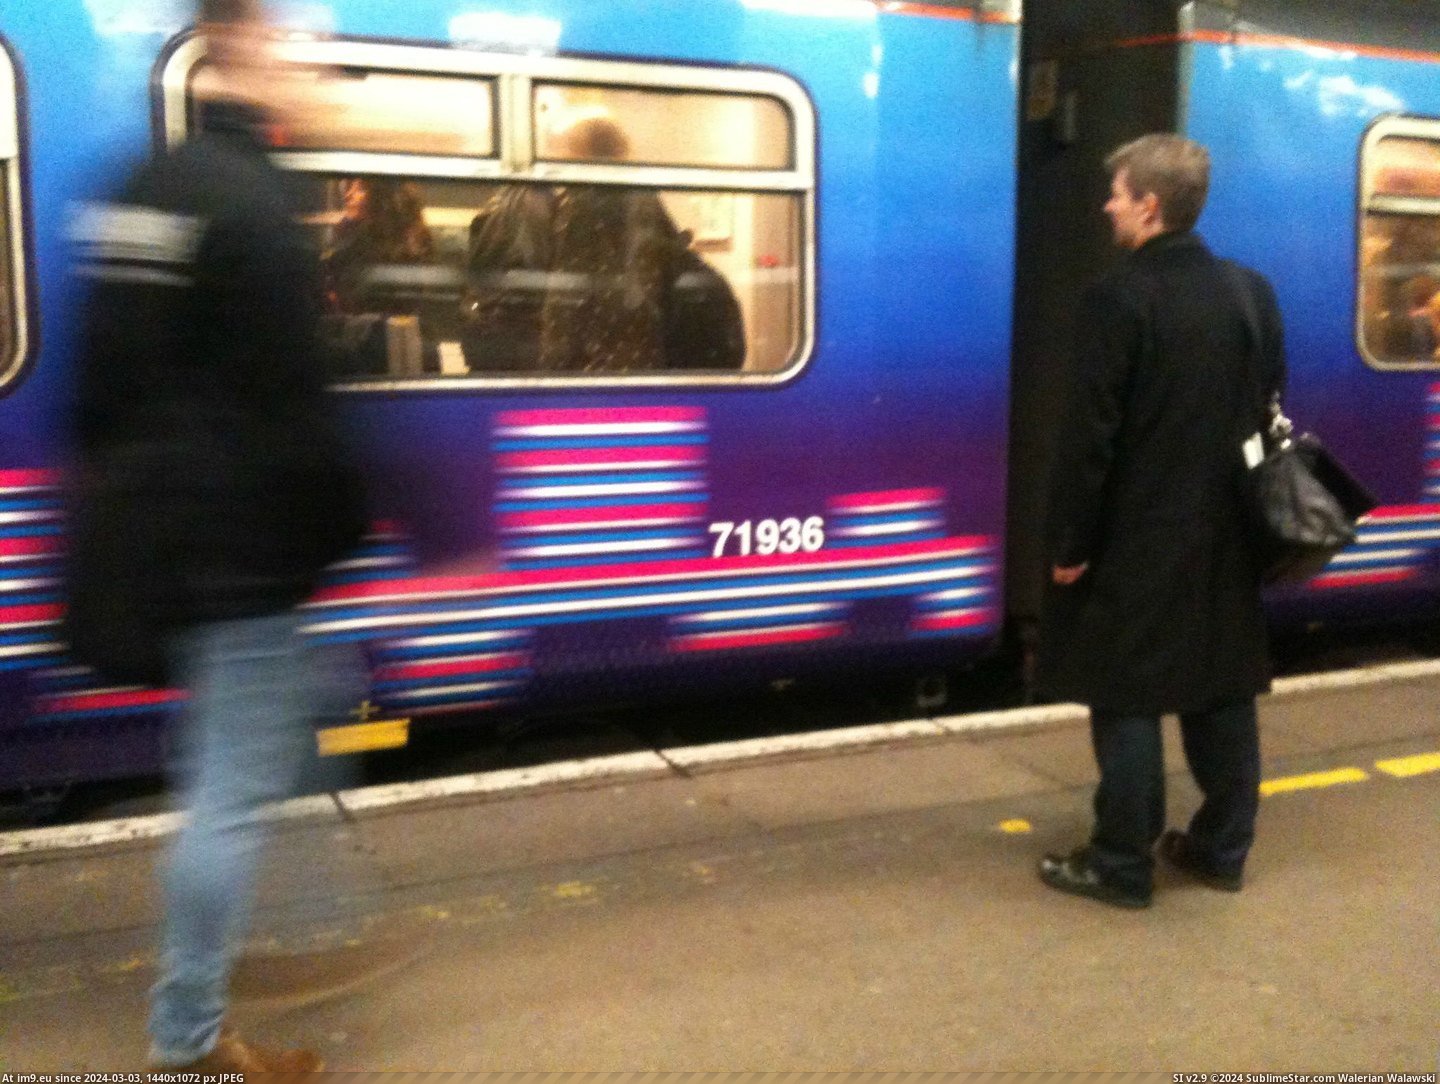 #Moving #Train #Blurry #Stopped #Graphics [Mildlyinteresting] The blurry graphics on this train make it look like it's moving when the train is stopped. Pic. (Image of album My r/MILDLYINTERESTING favs))